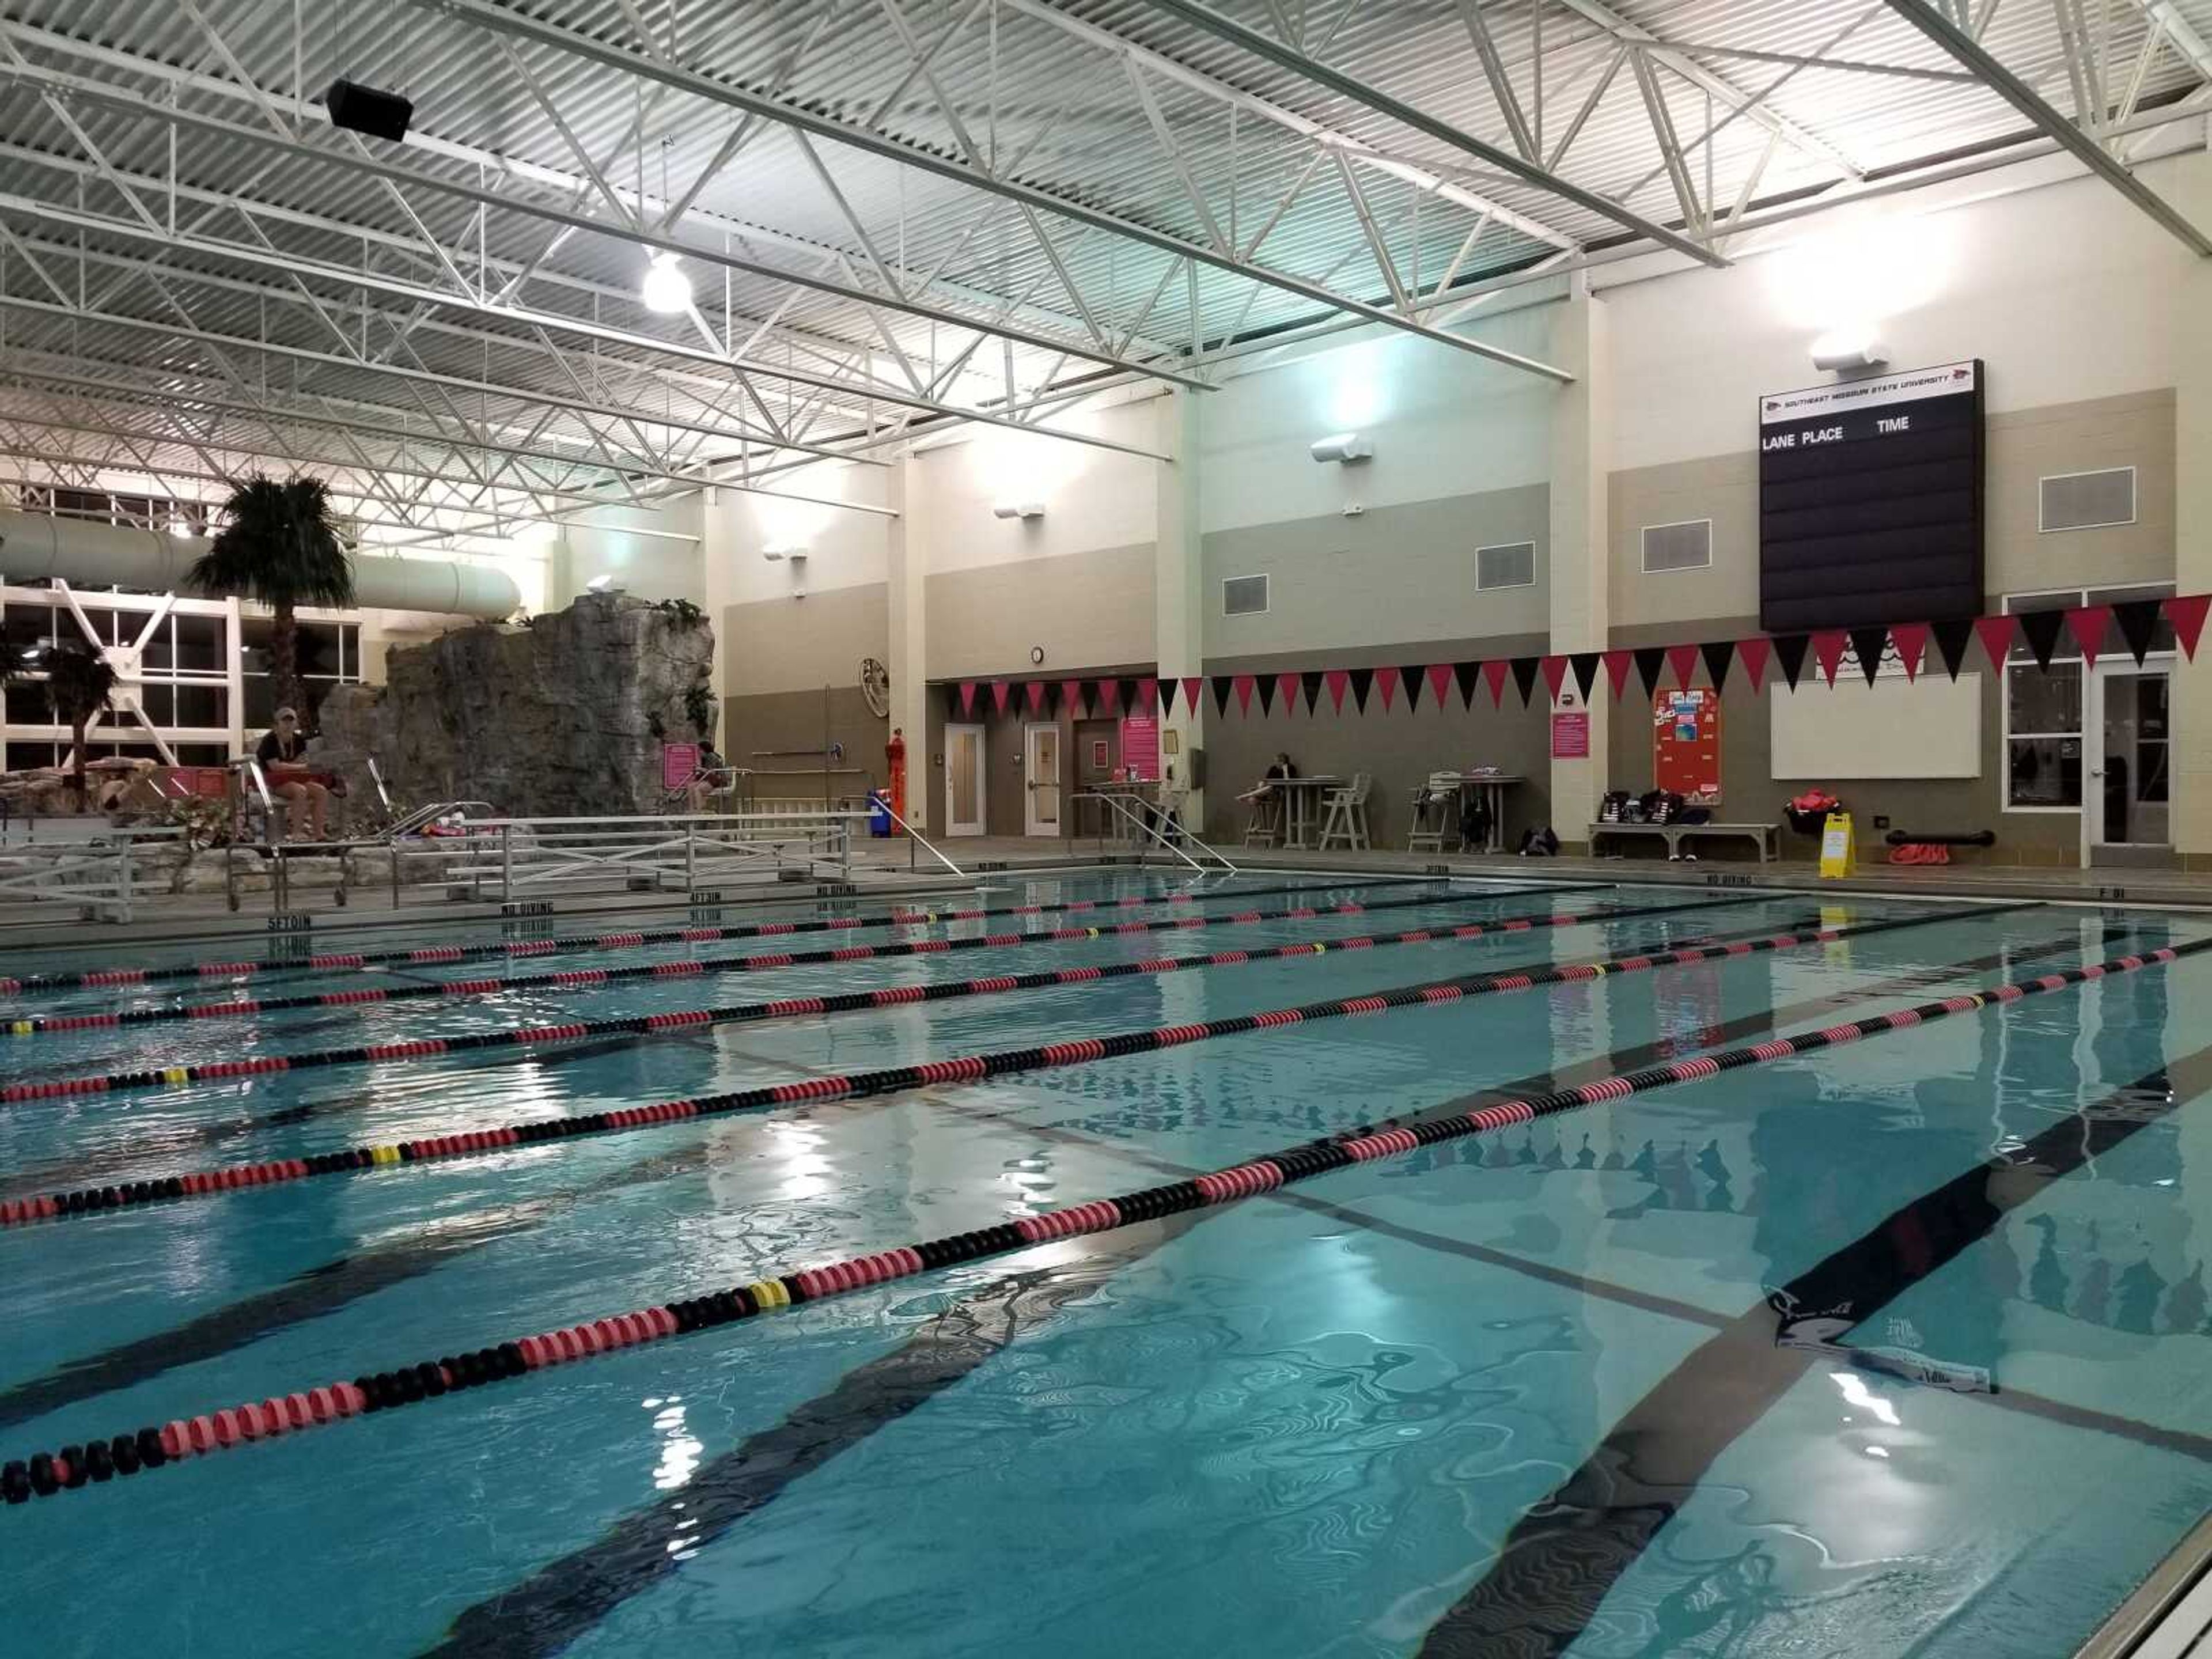 The Student Aquatic Center sits calmly as life guards look over the pool.